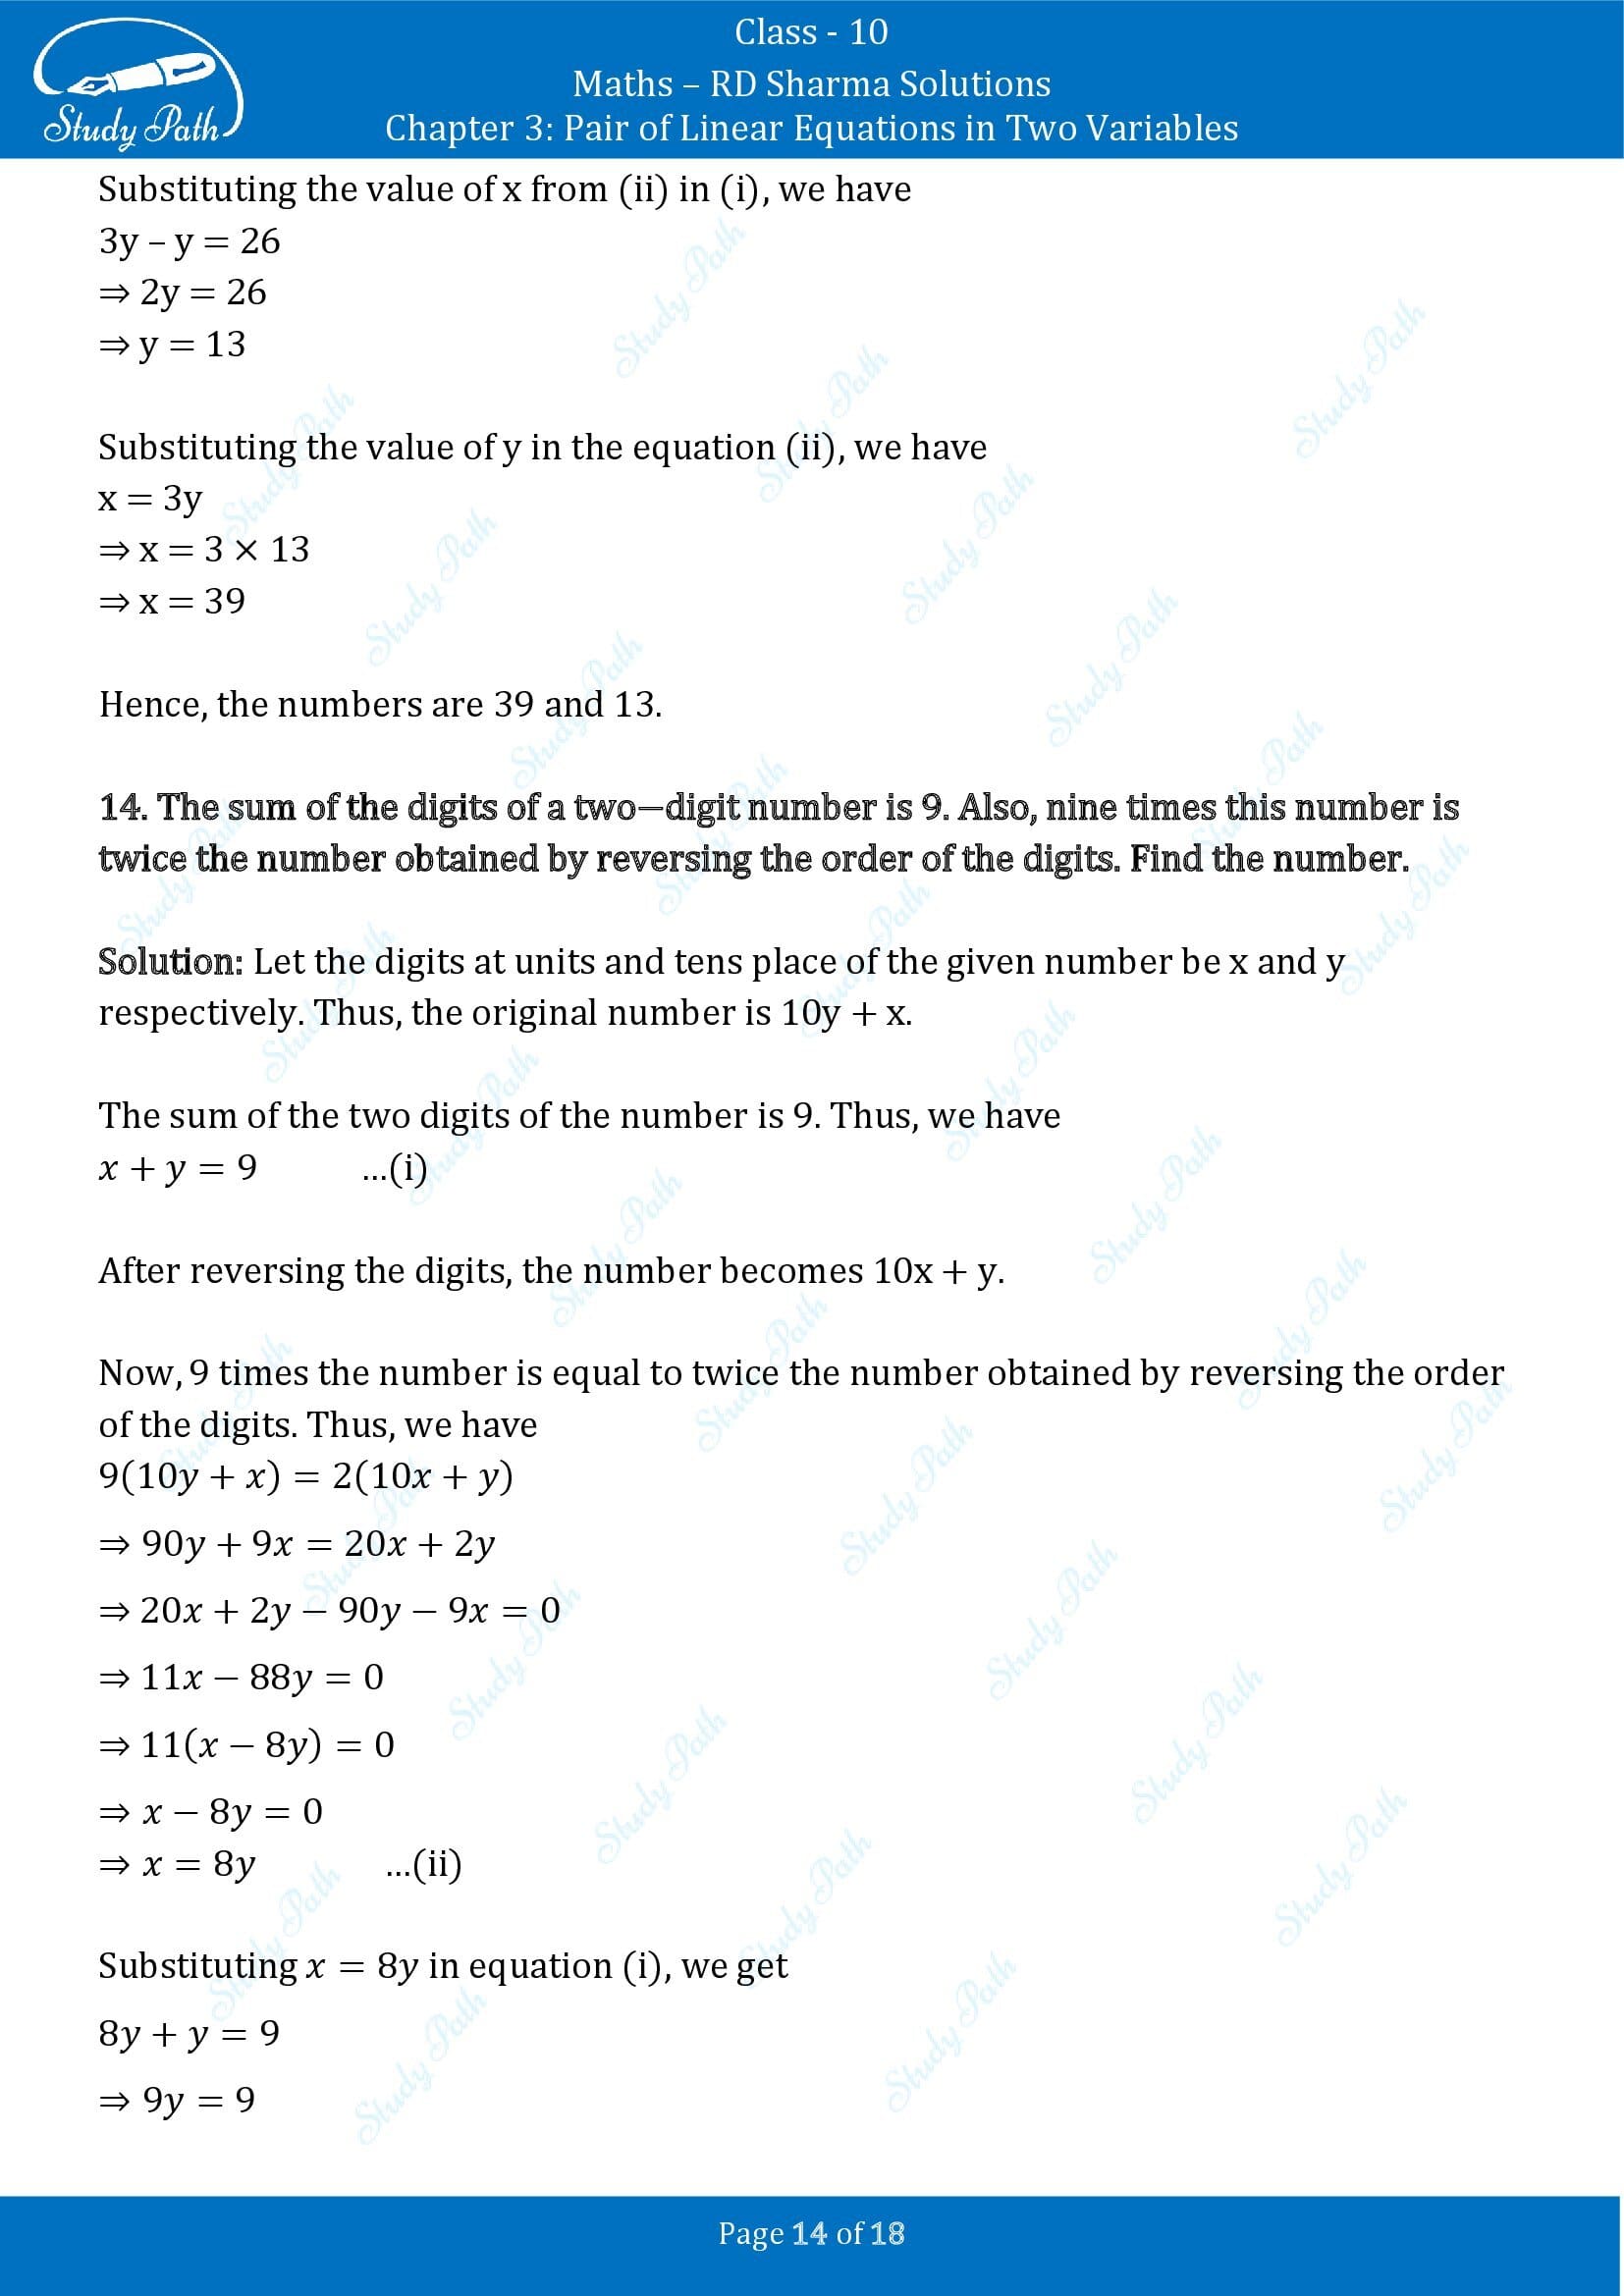 RD Sharma Solutions Class 10 Chapter 3 Pair of Linear Equations in Two Variables Exercise 3.7 00014